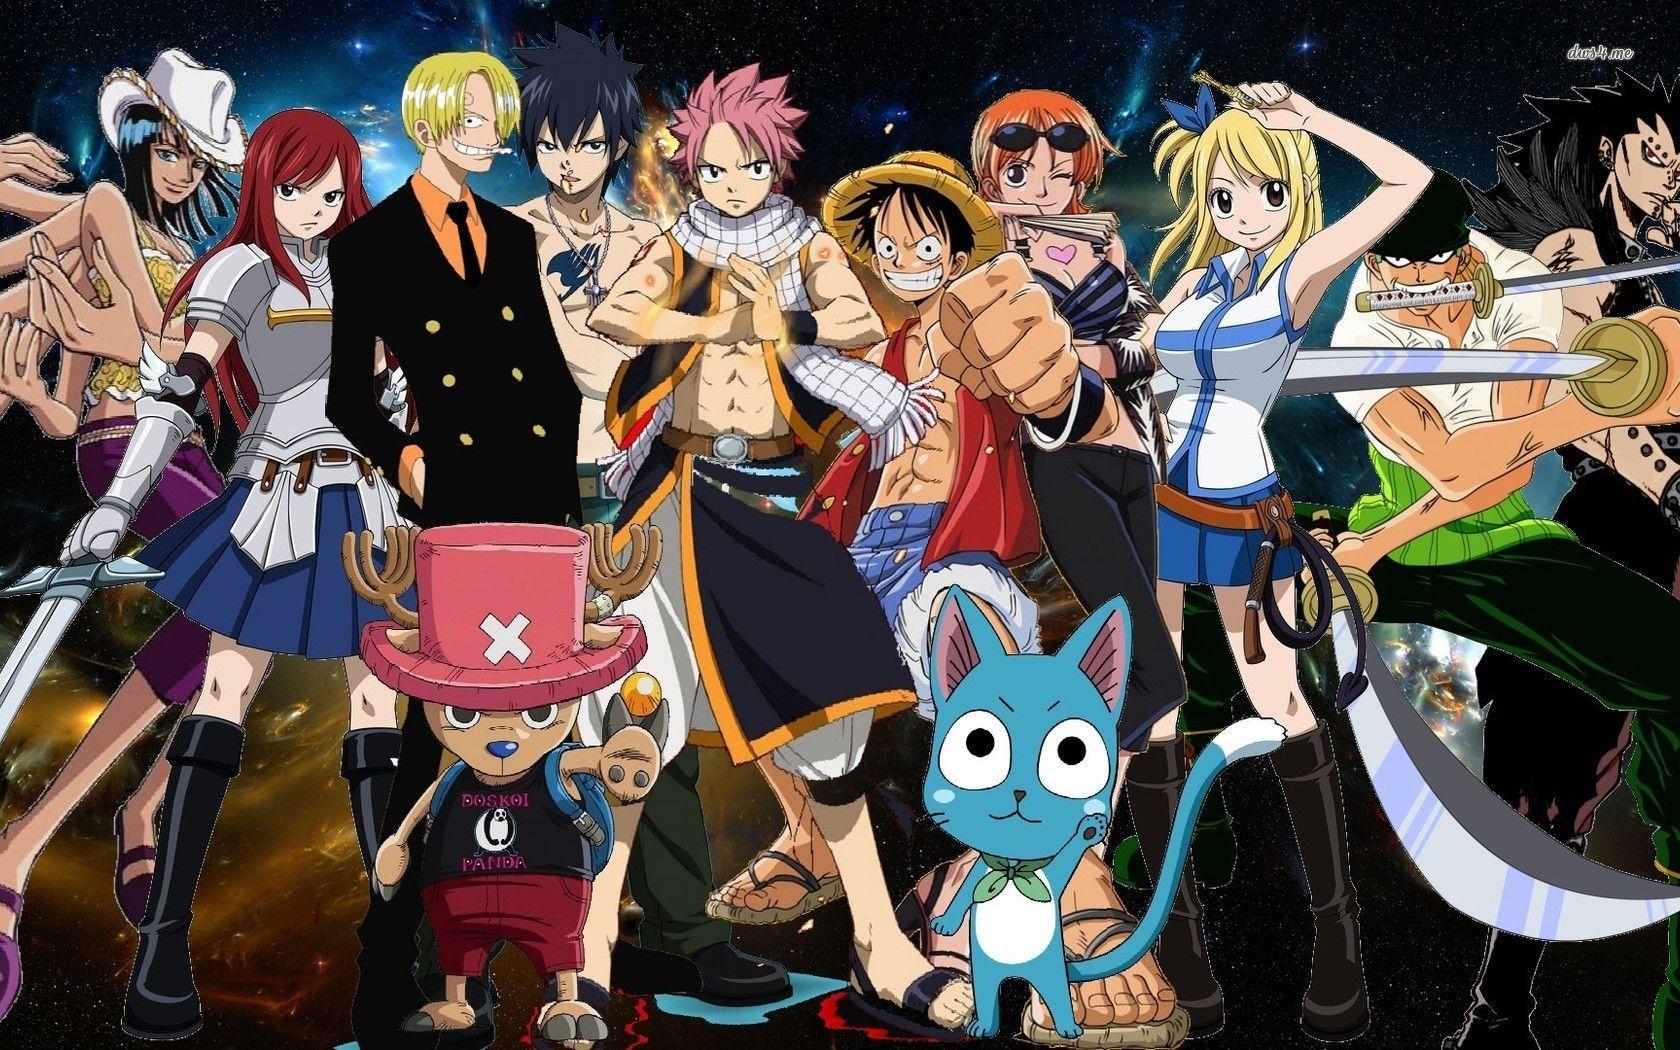 Wallpaper For > Anime Wallpaper One Piece